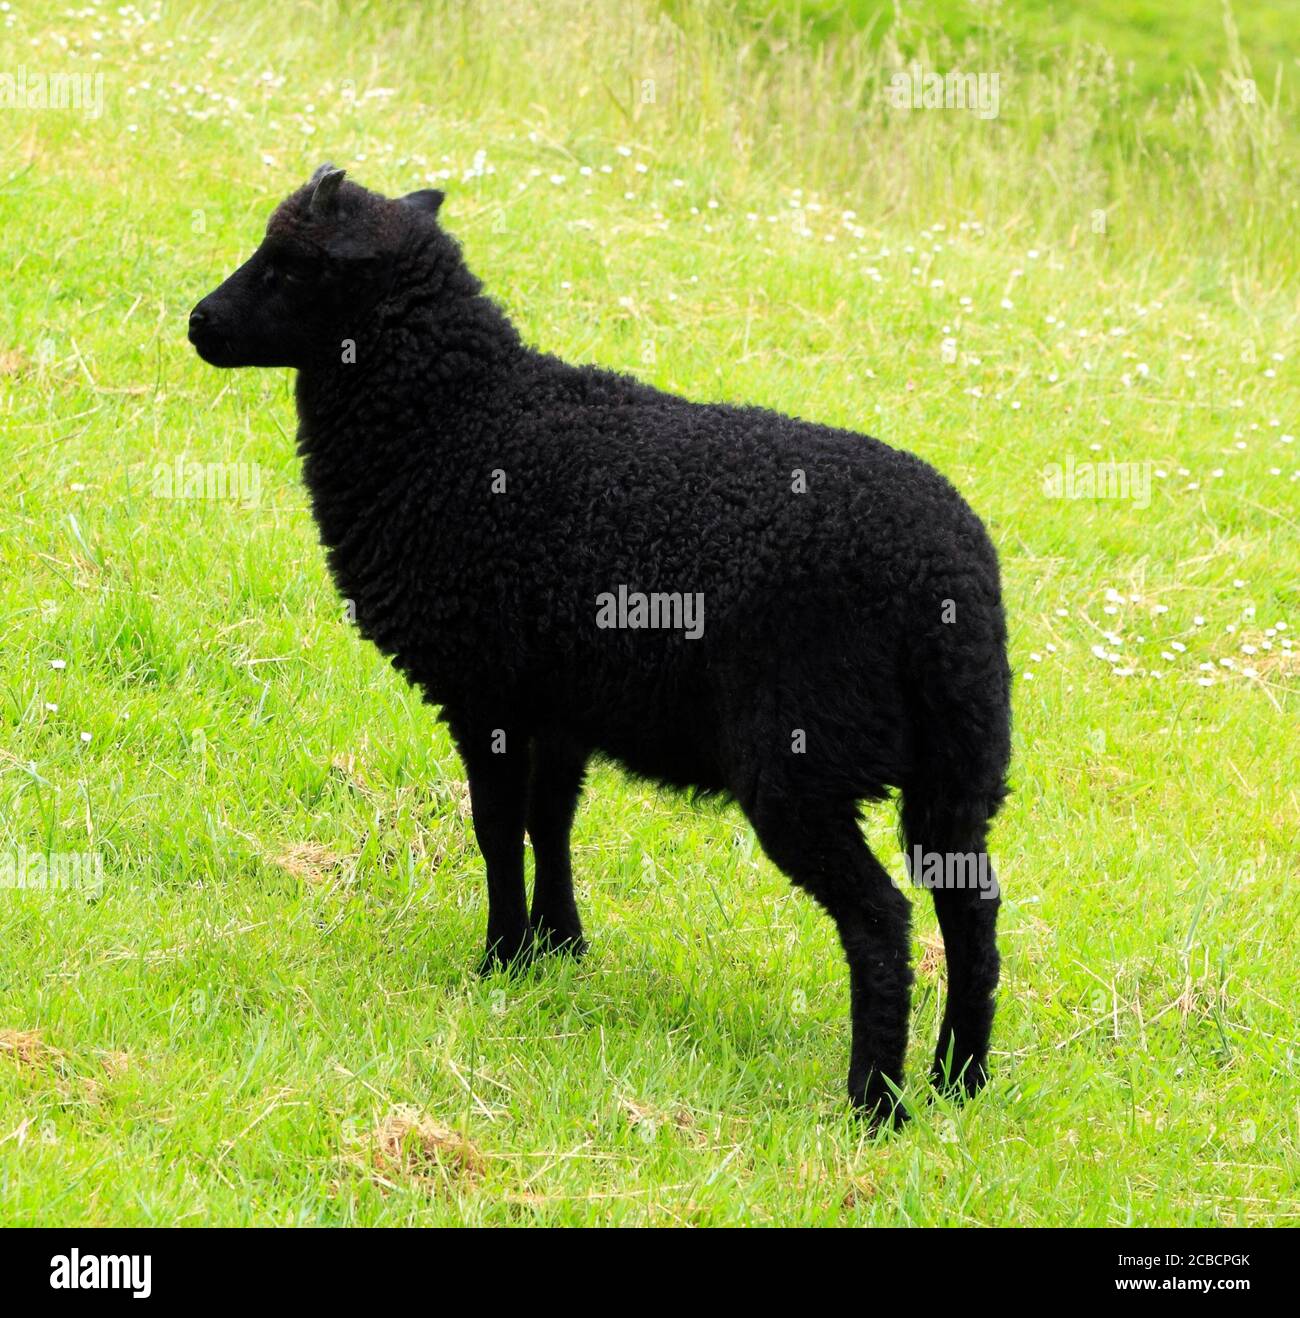 Black Moorland Sheep, Hutton le Hole, North Yorkshire Moors, Angleterre, Royaume-Uni Banque D'Images